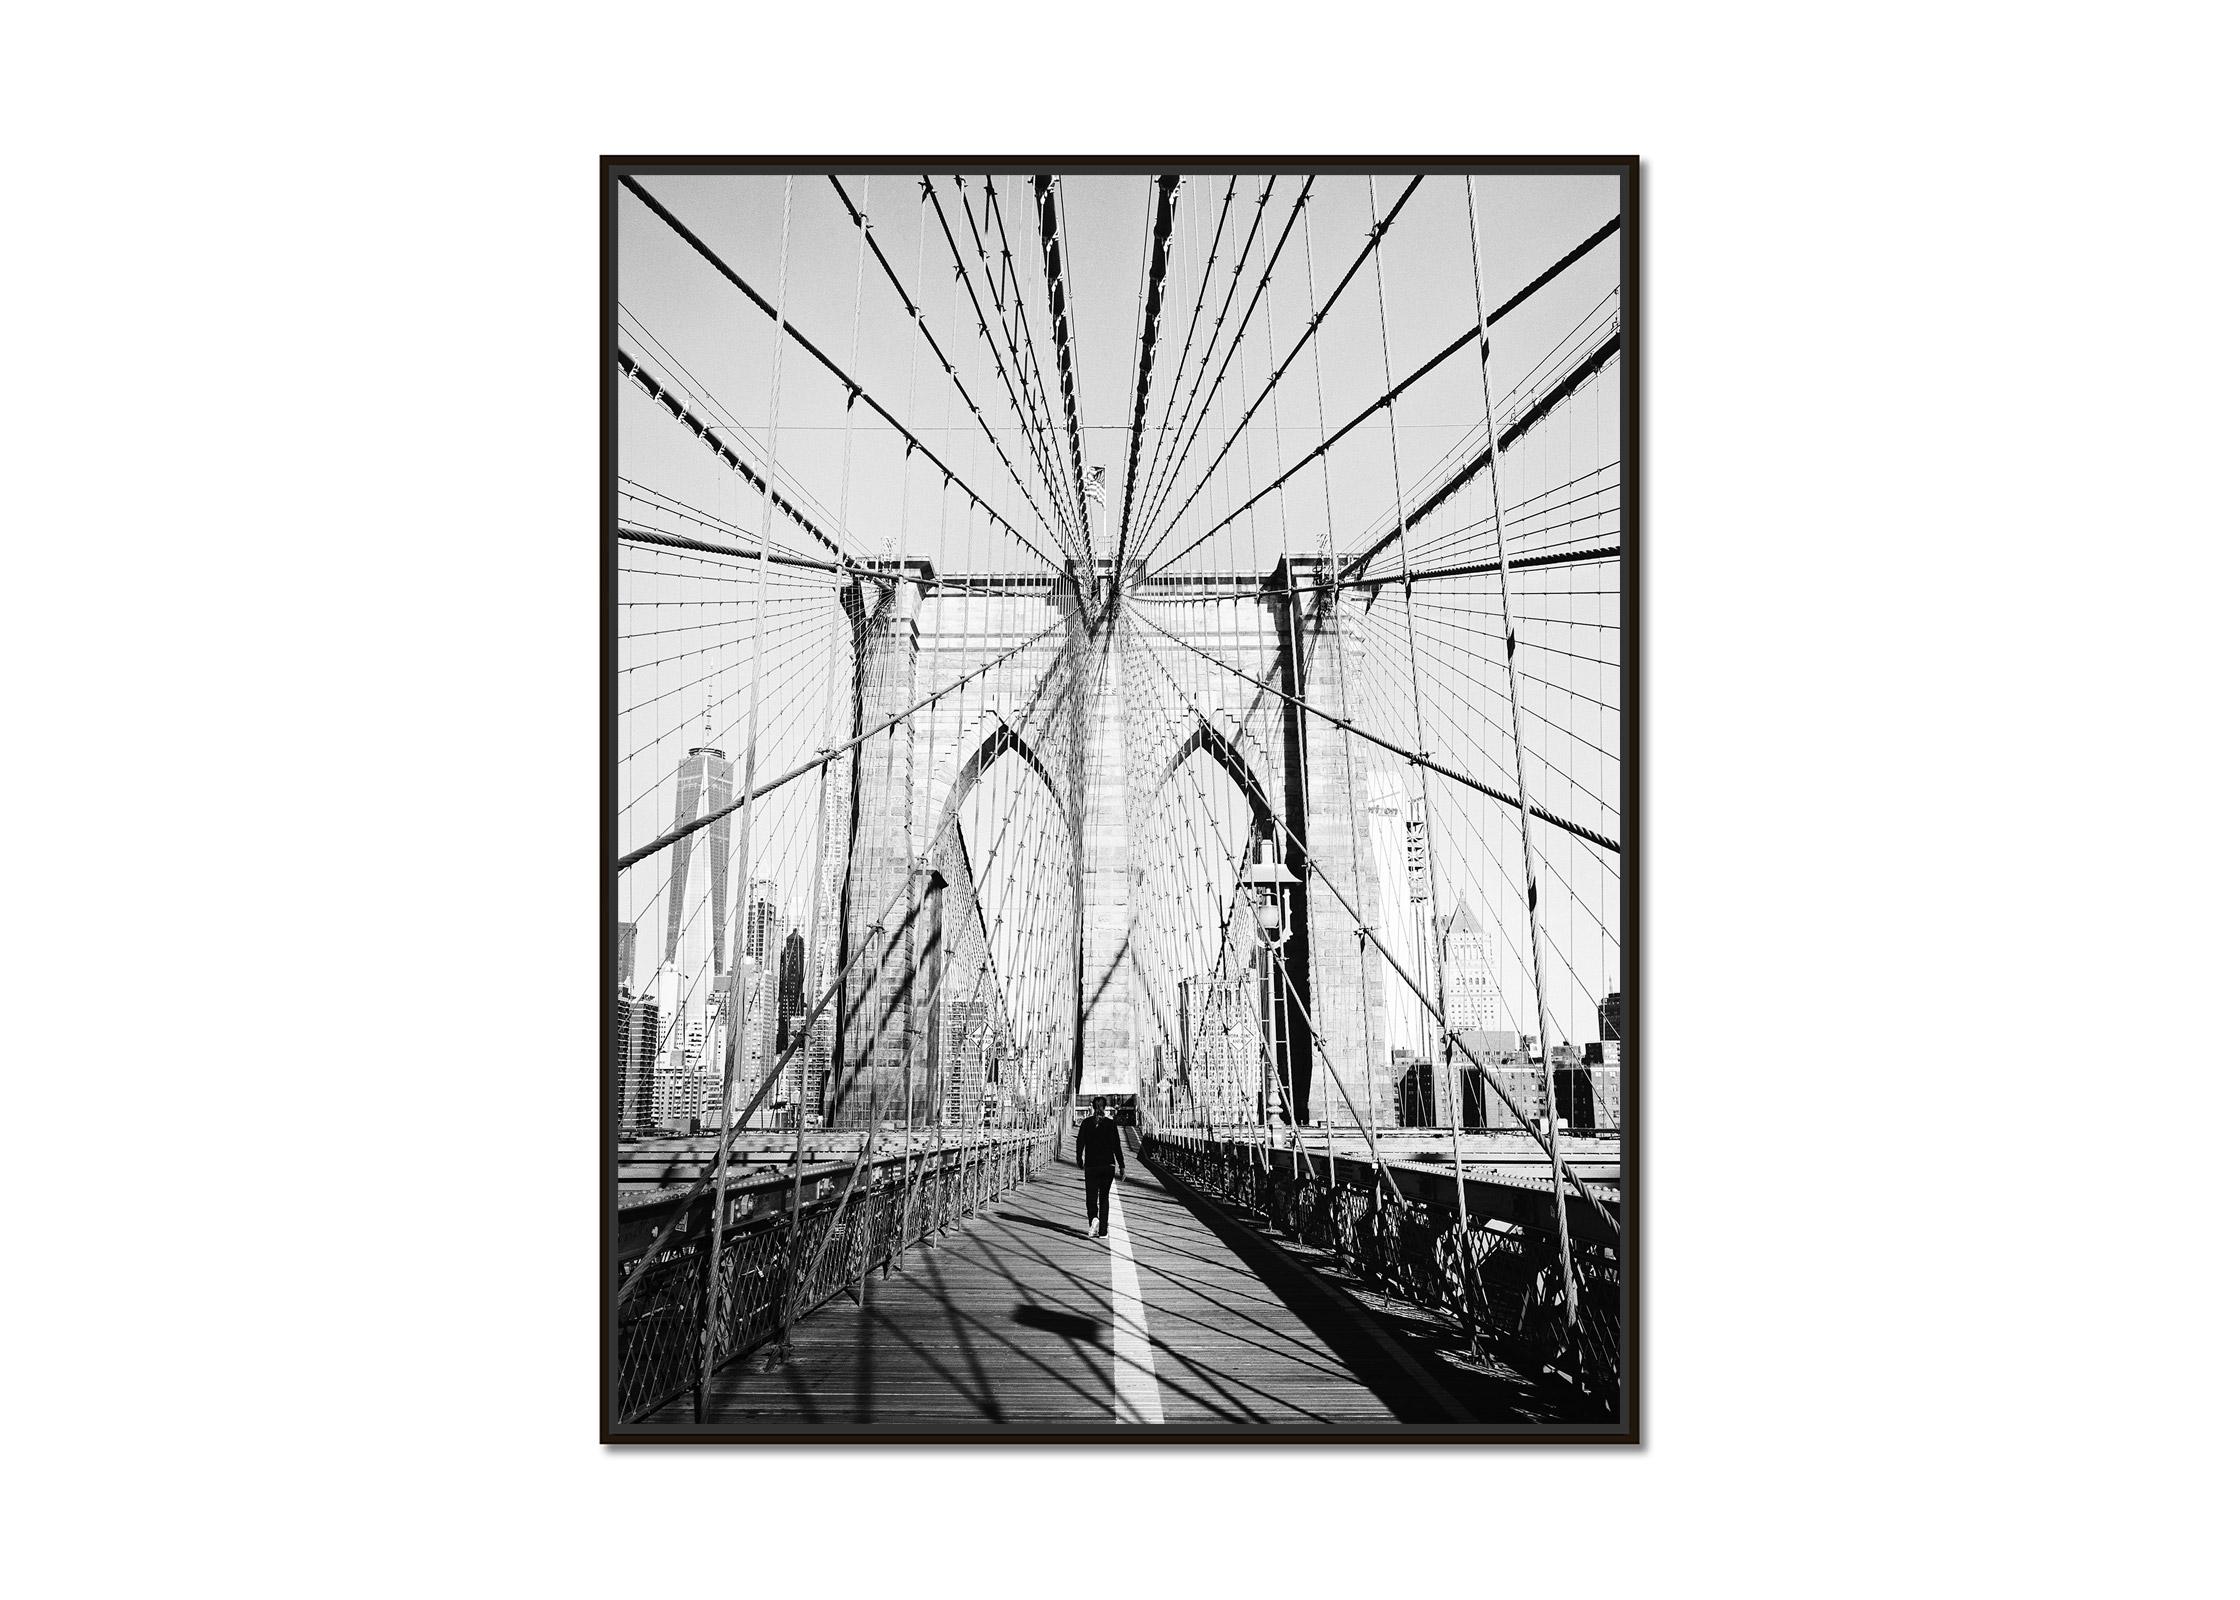 Brooklyn Bridge, New York City, USA, black and white photography, art cityscape - Photograph by Gerald Berghammer